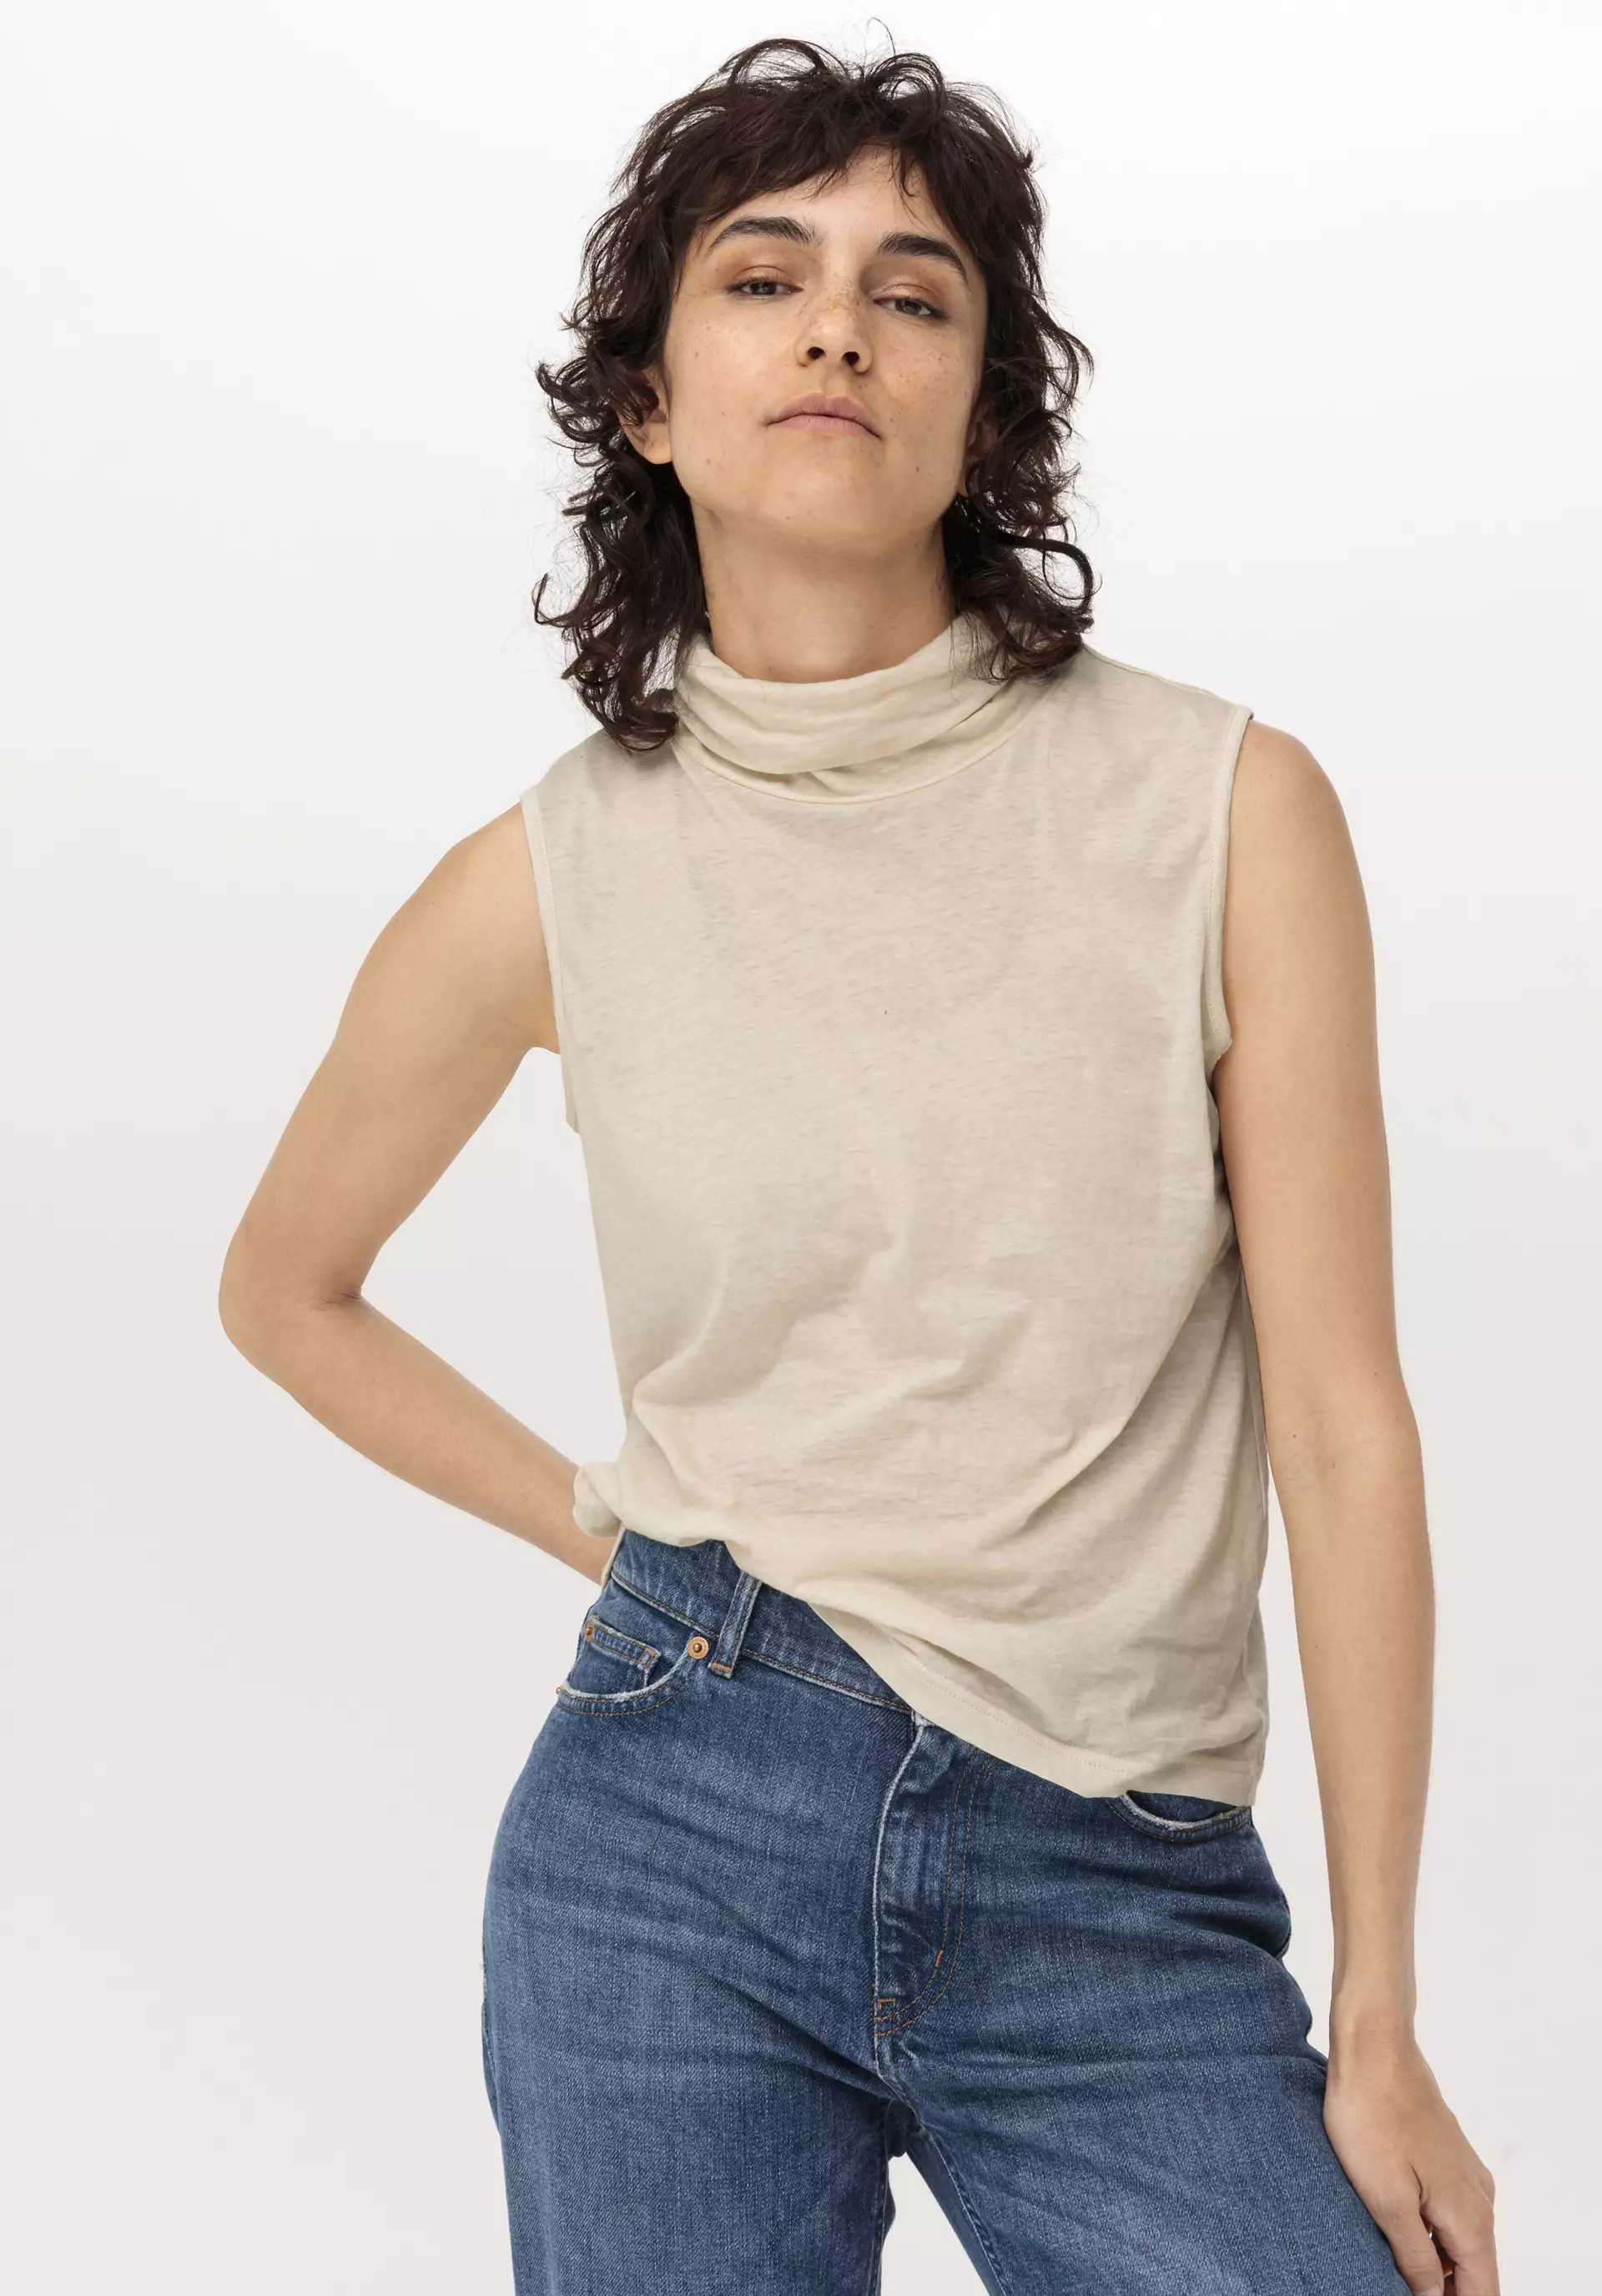 Turtleneck top made from pure organic cotton - 2